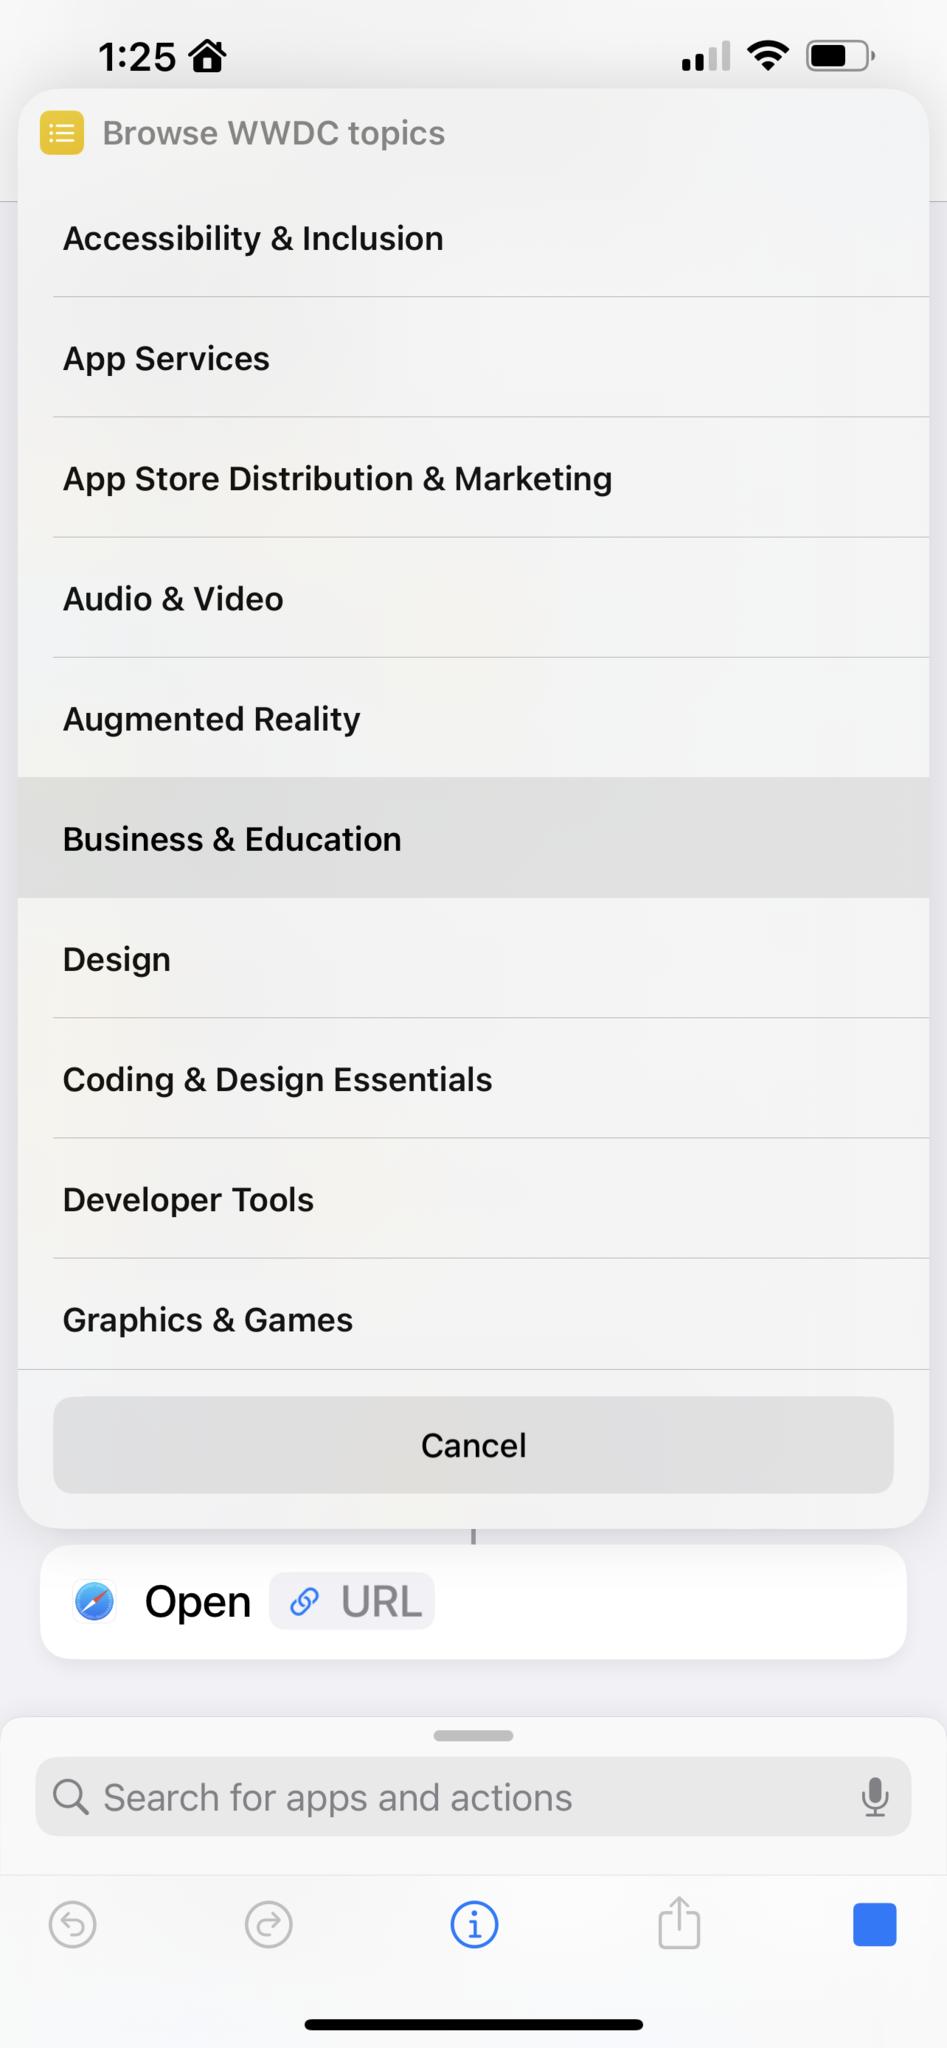 Screenshot showing the "Browse WWDC topics" shortcut running, presenting a menu of the topics and "Business & Education" selected.